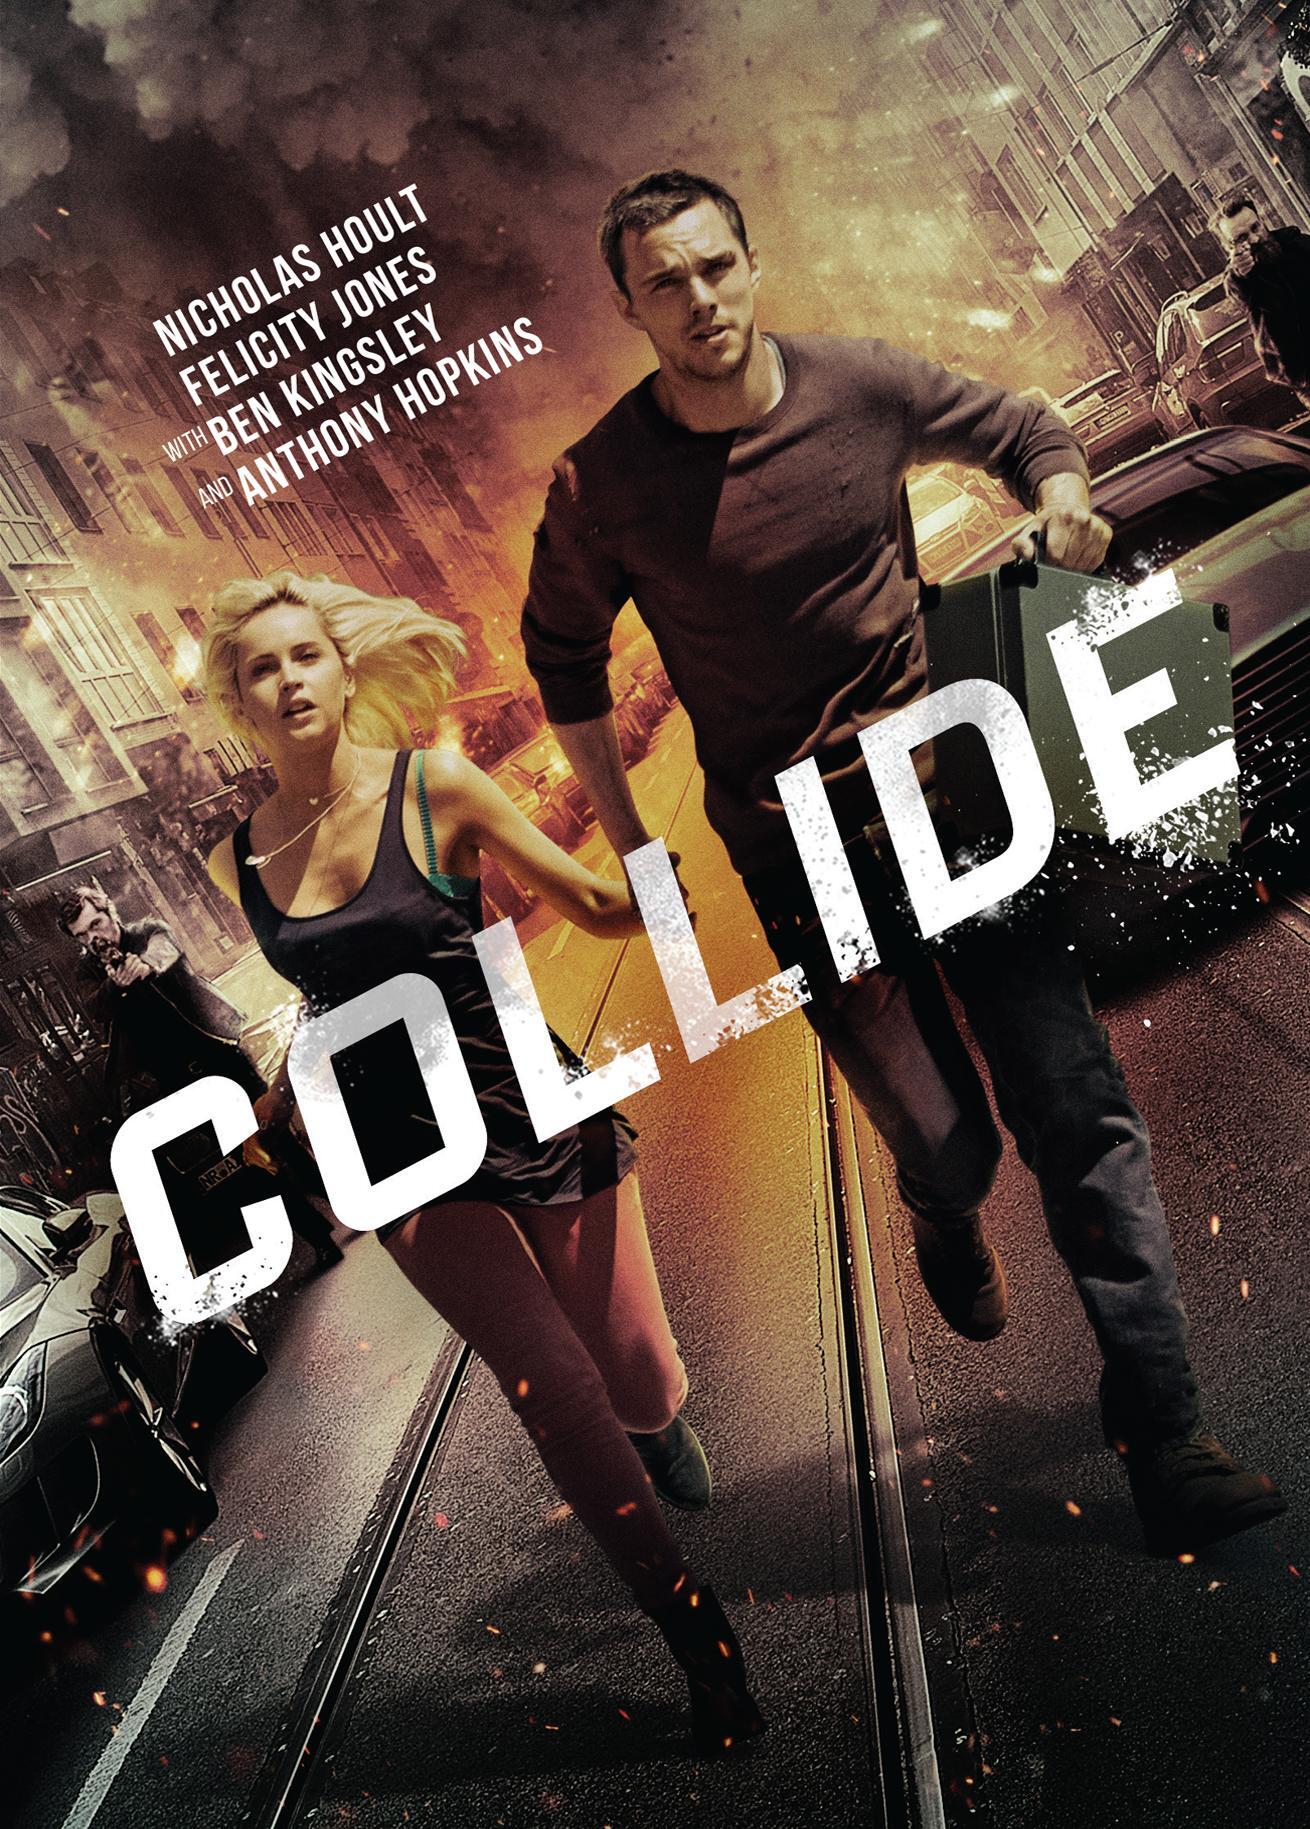 Collide - DVD [ 2017 ]  - Action Movies On DVD - Movies On GRUV